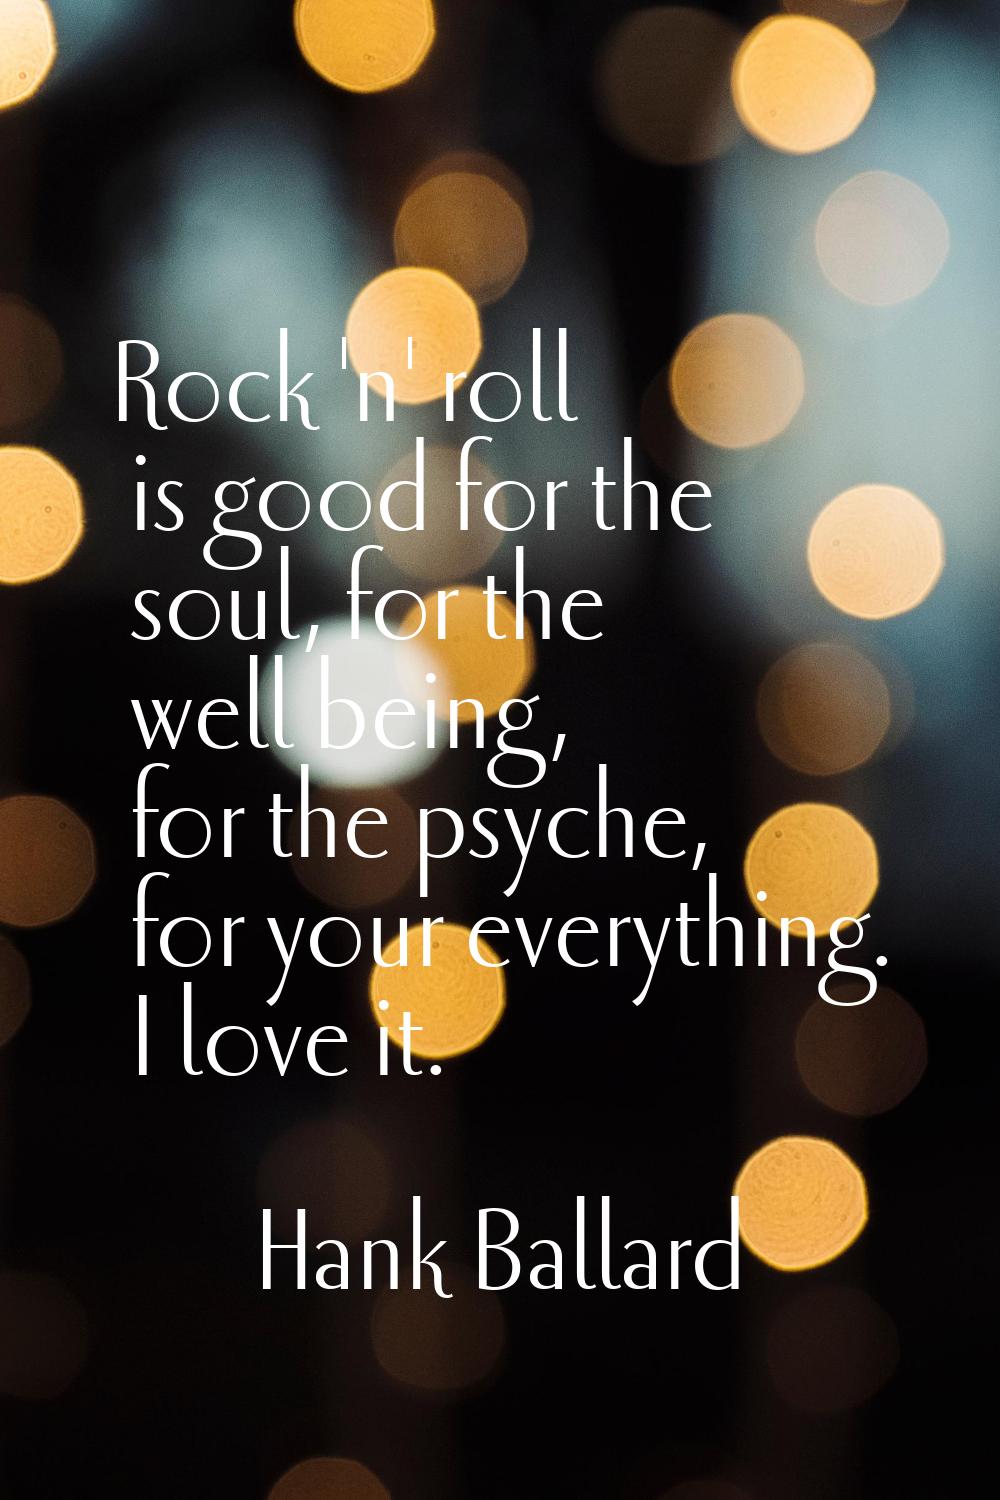 Rock 'n' roll is good for the soul, for the well being, for the psyche, for your everything. I love